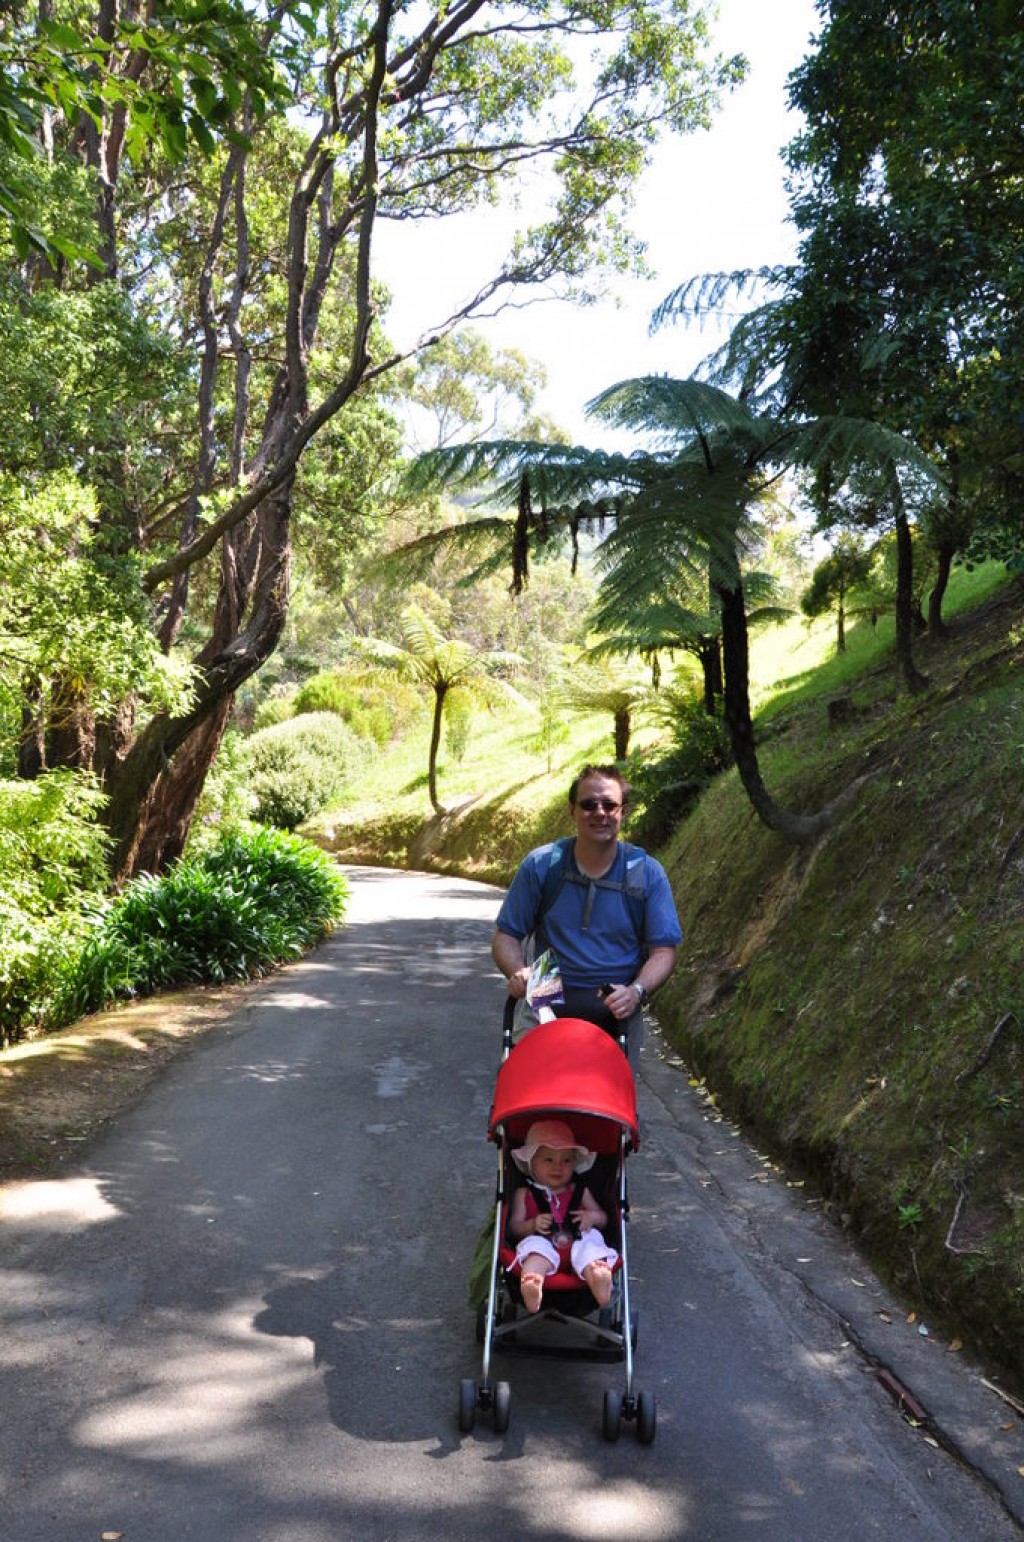 The Botanical Gardens of Wellington are extensive, and would take many days to explore fully.  We really enjoyed our stroll around the gardens.